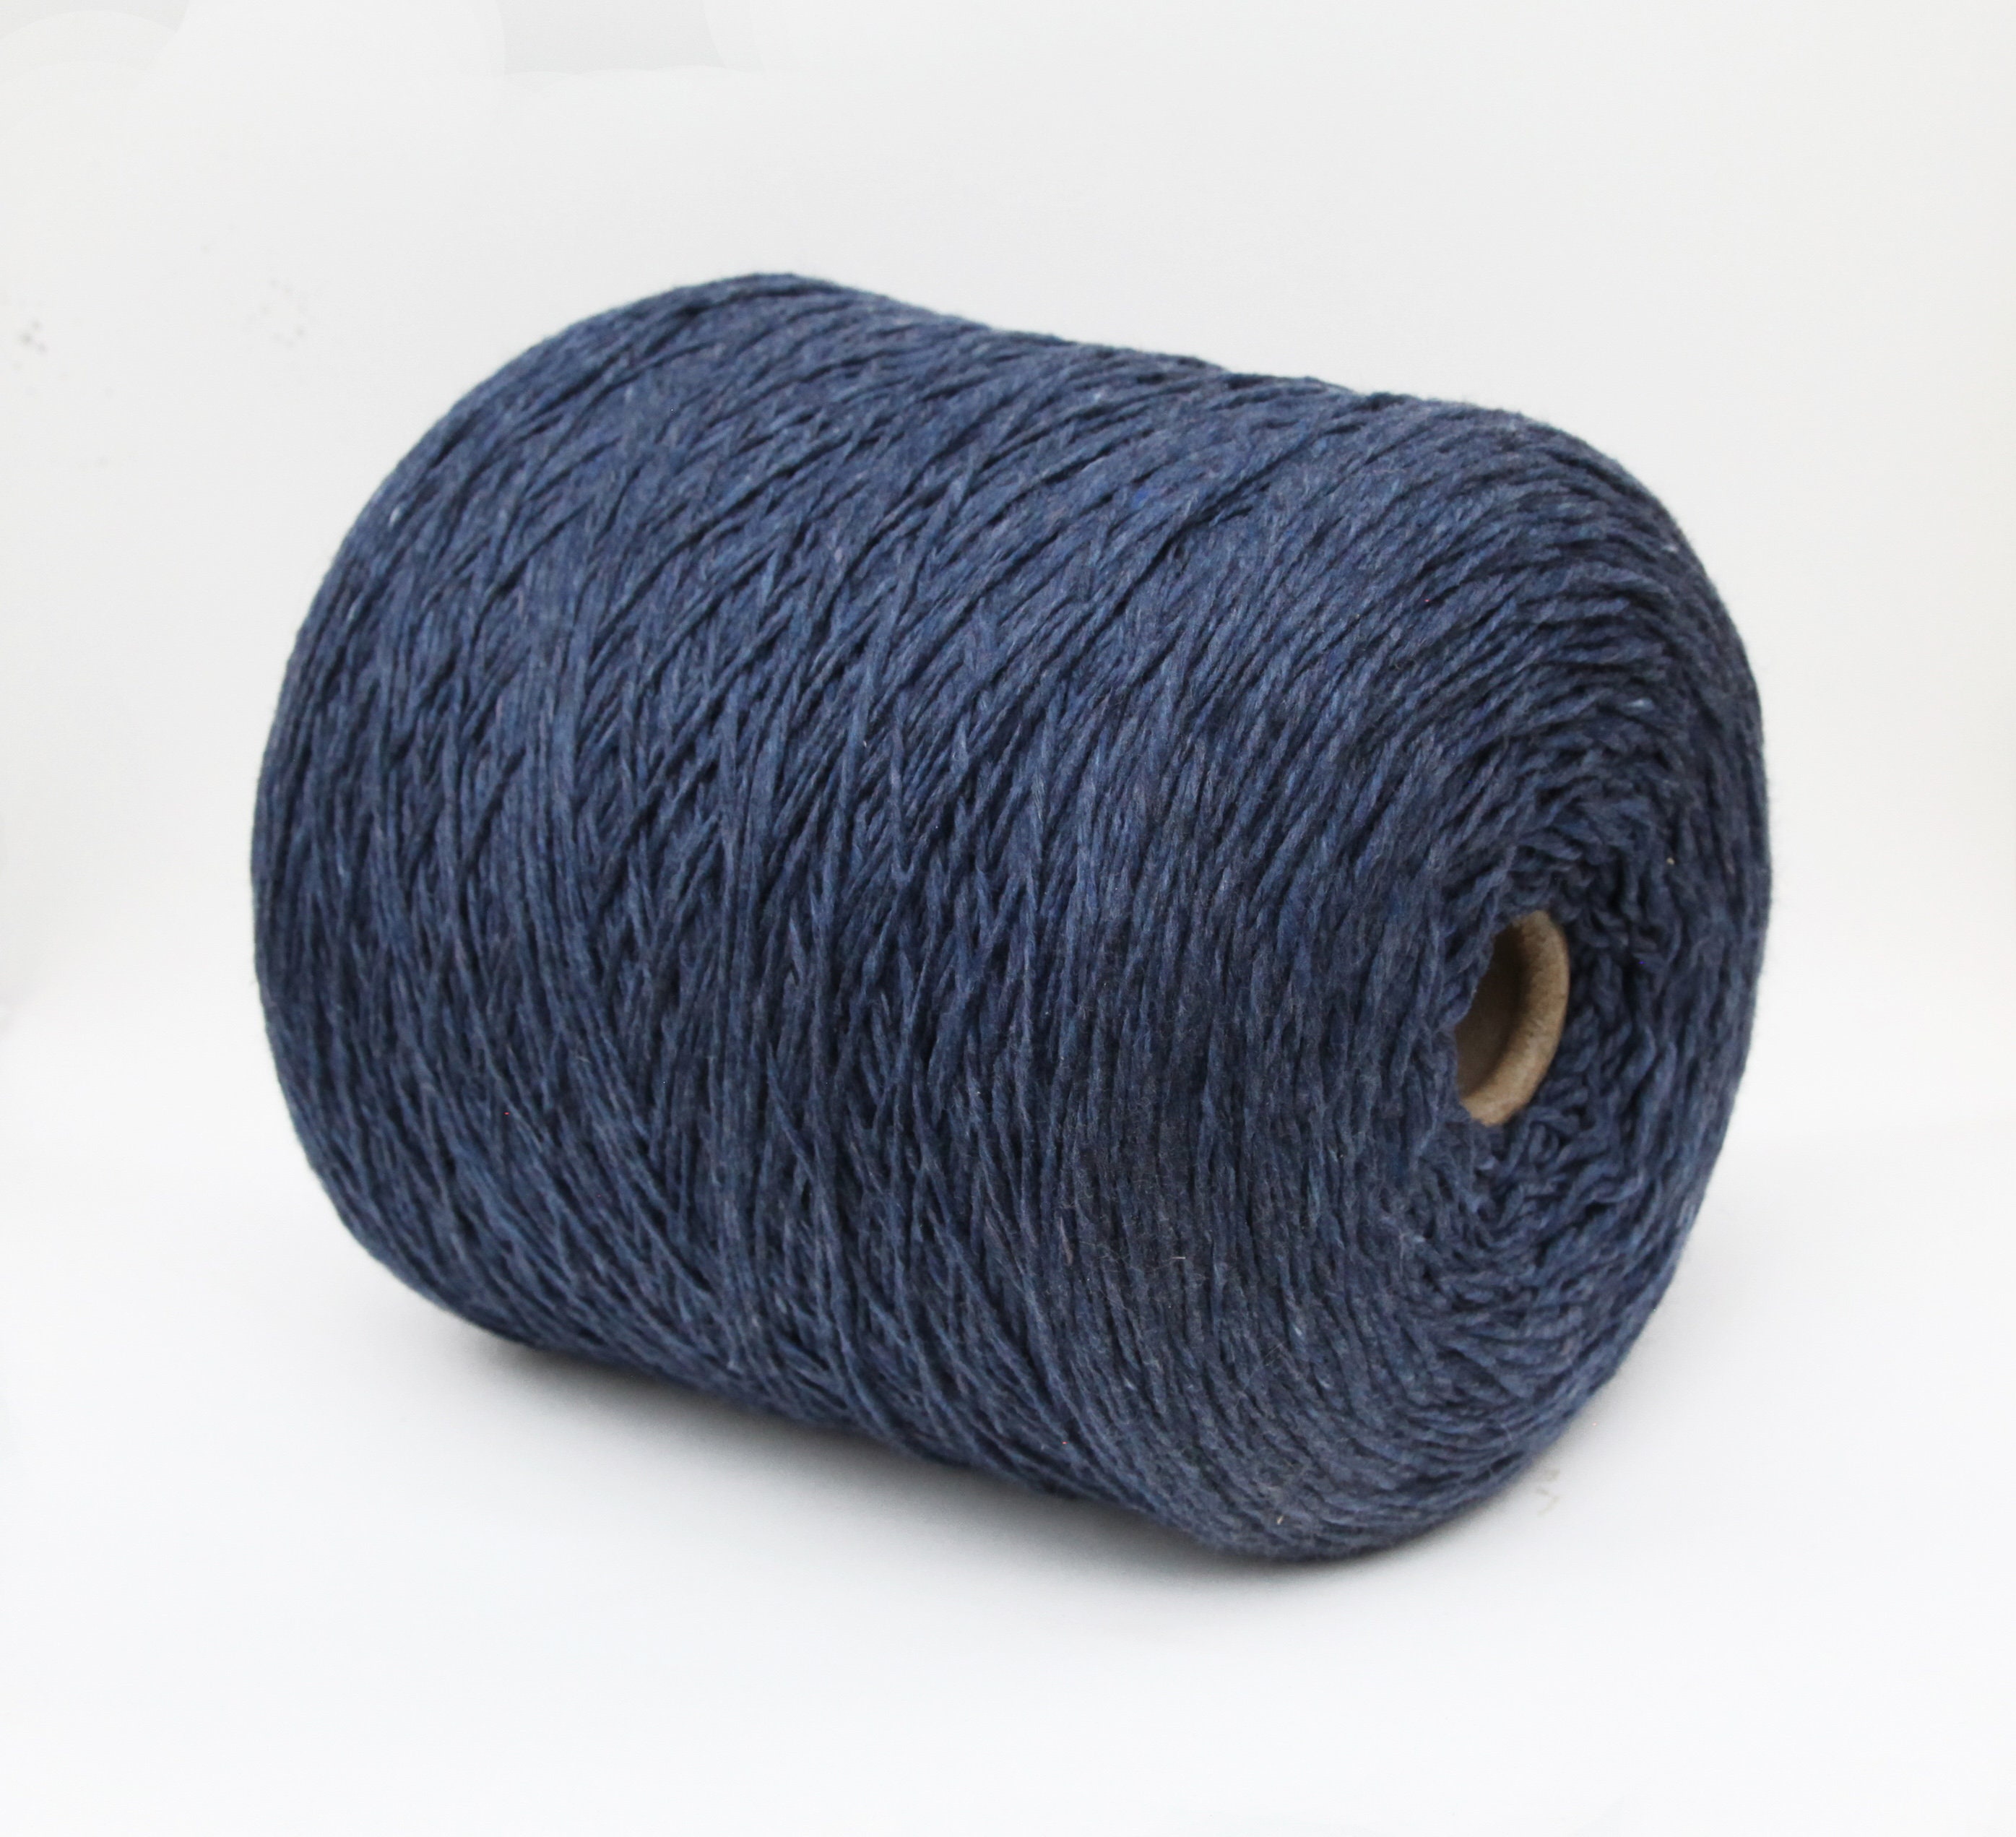 Cashmere Yarn For Knitting, Crochet & Weaving Tagged Bulky